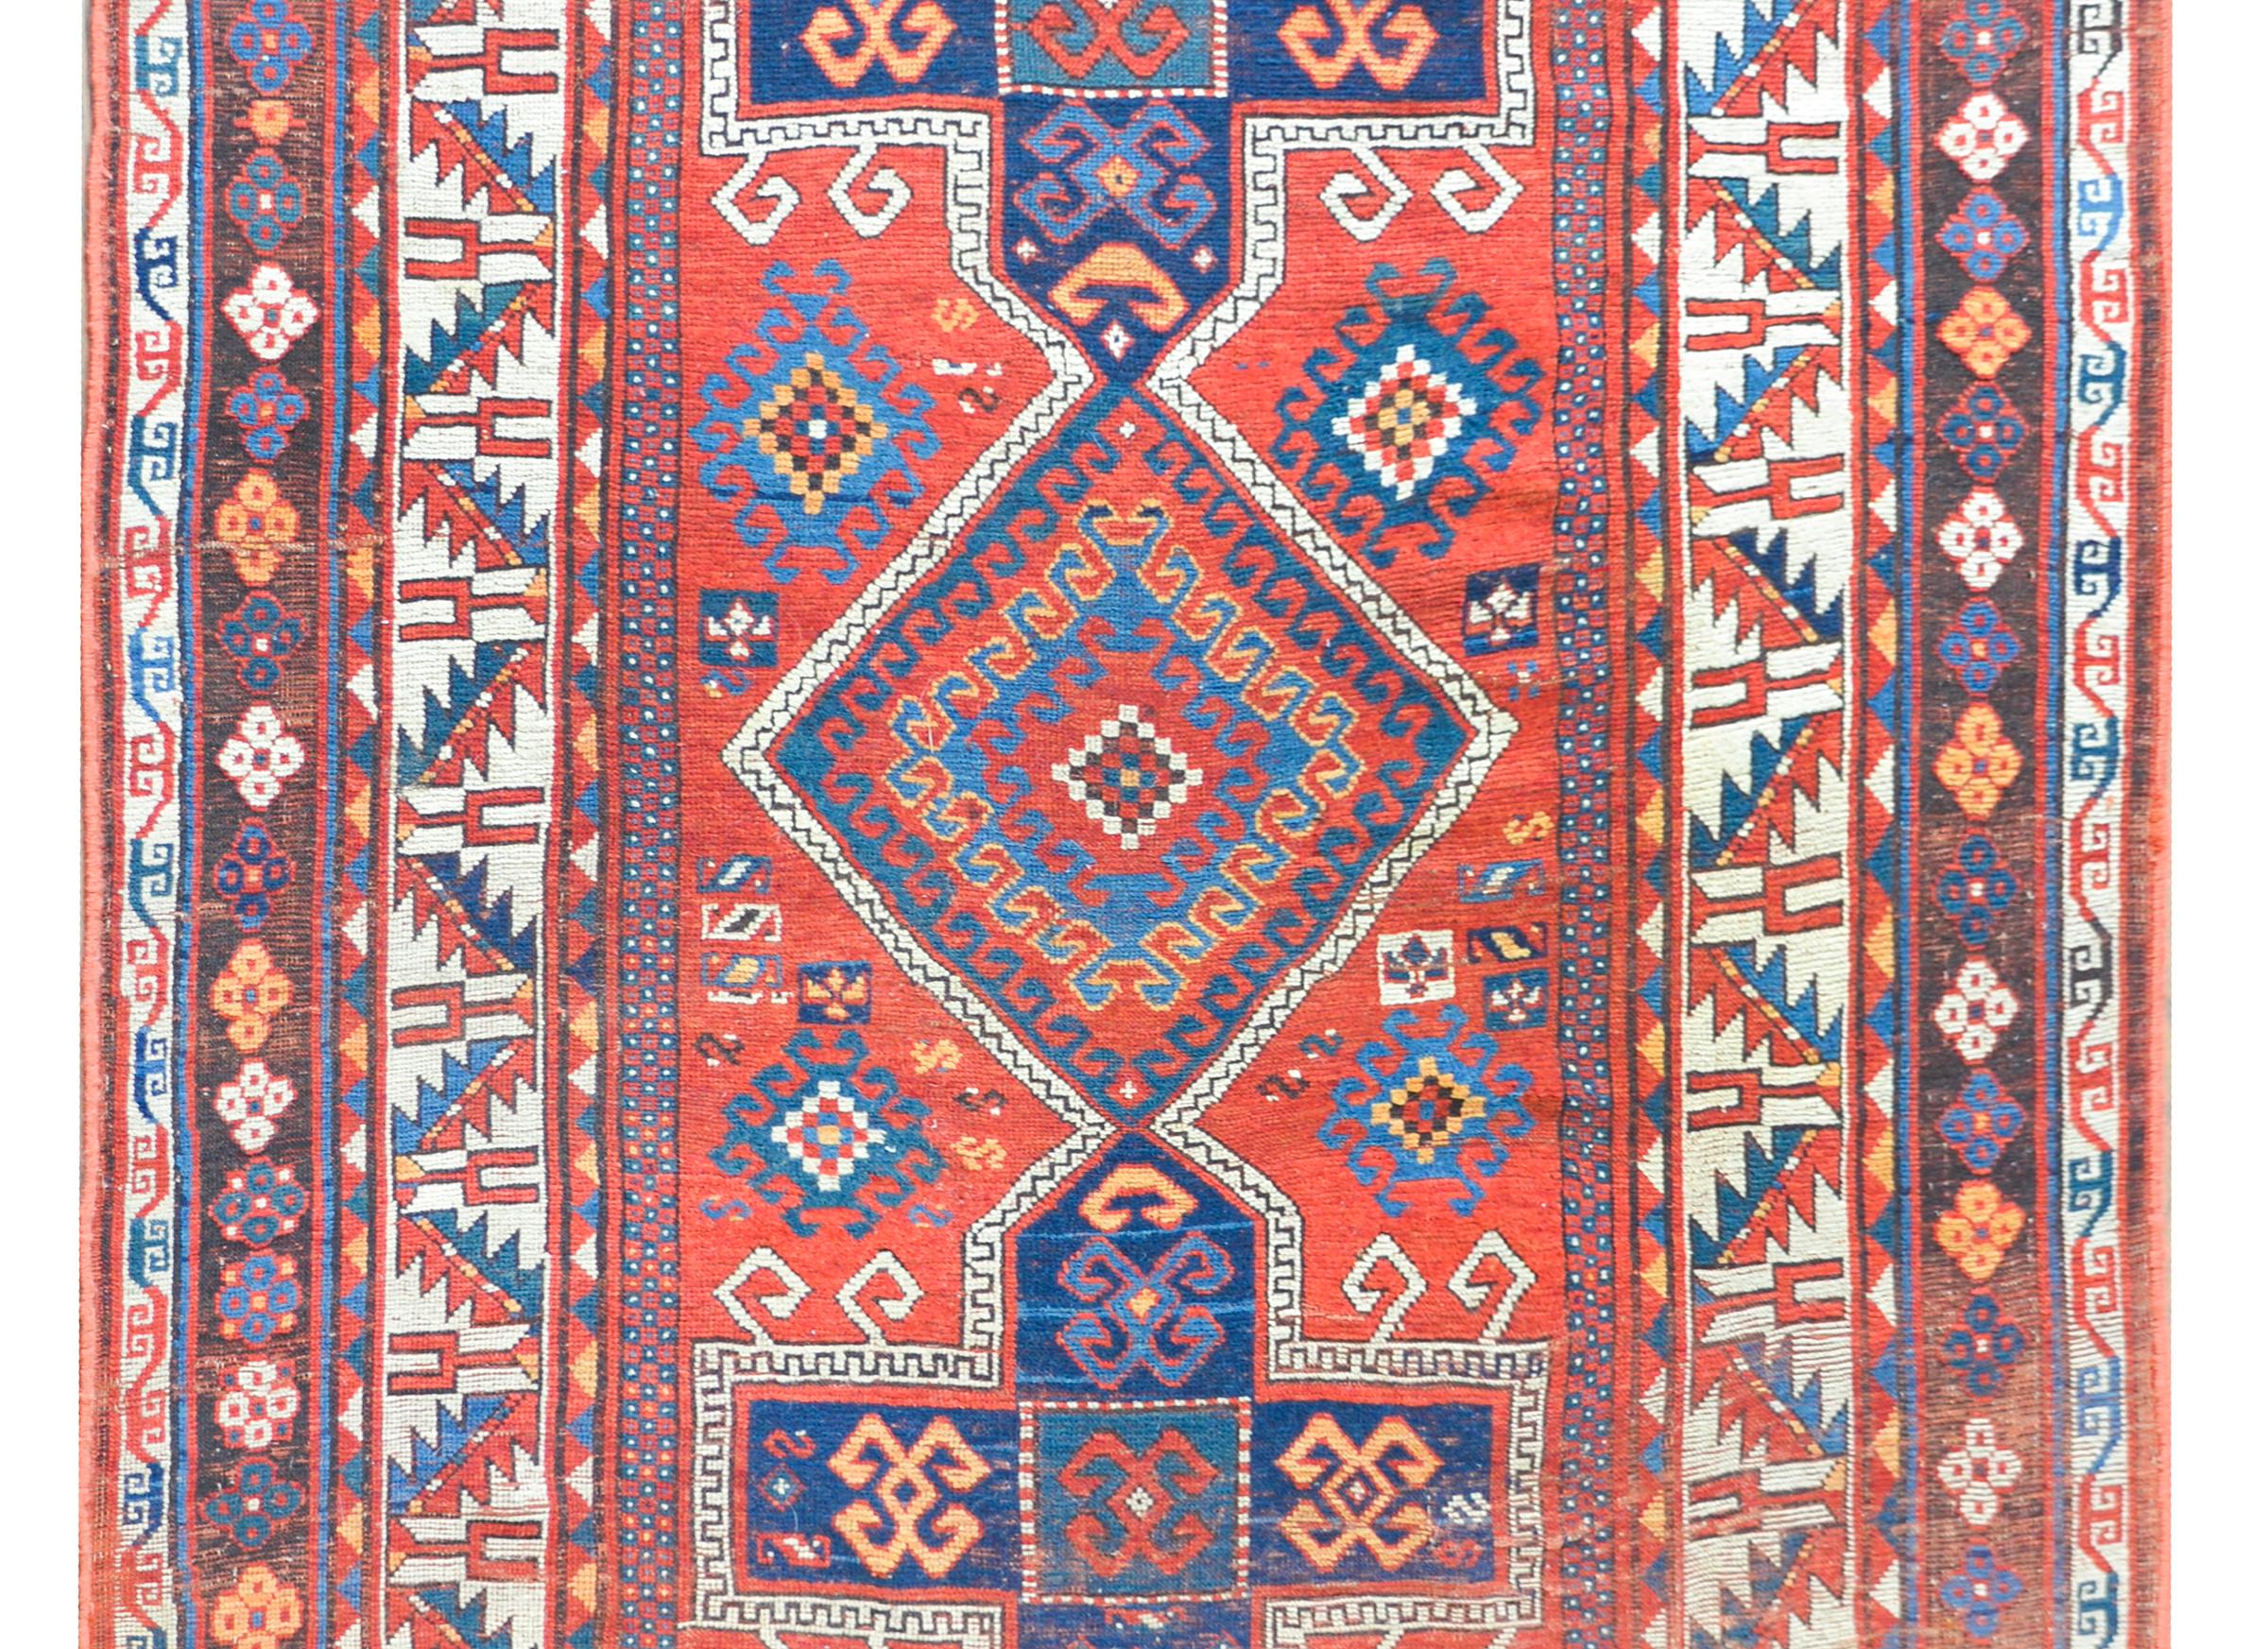 A stunning early 20th century Persian Kazak rug with two large cross and one large diamond medallions with stylized floral and crab patterns, amidst a field of more stylized flowers and goats, all woven in light and dark indigo, teal, gold, and